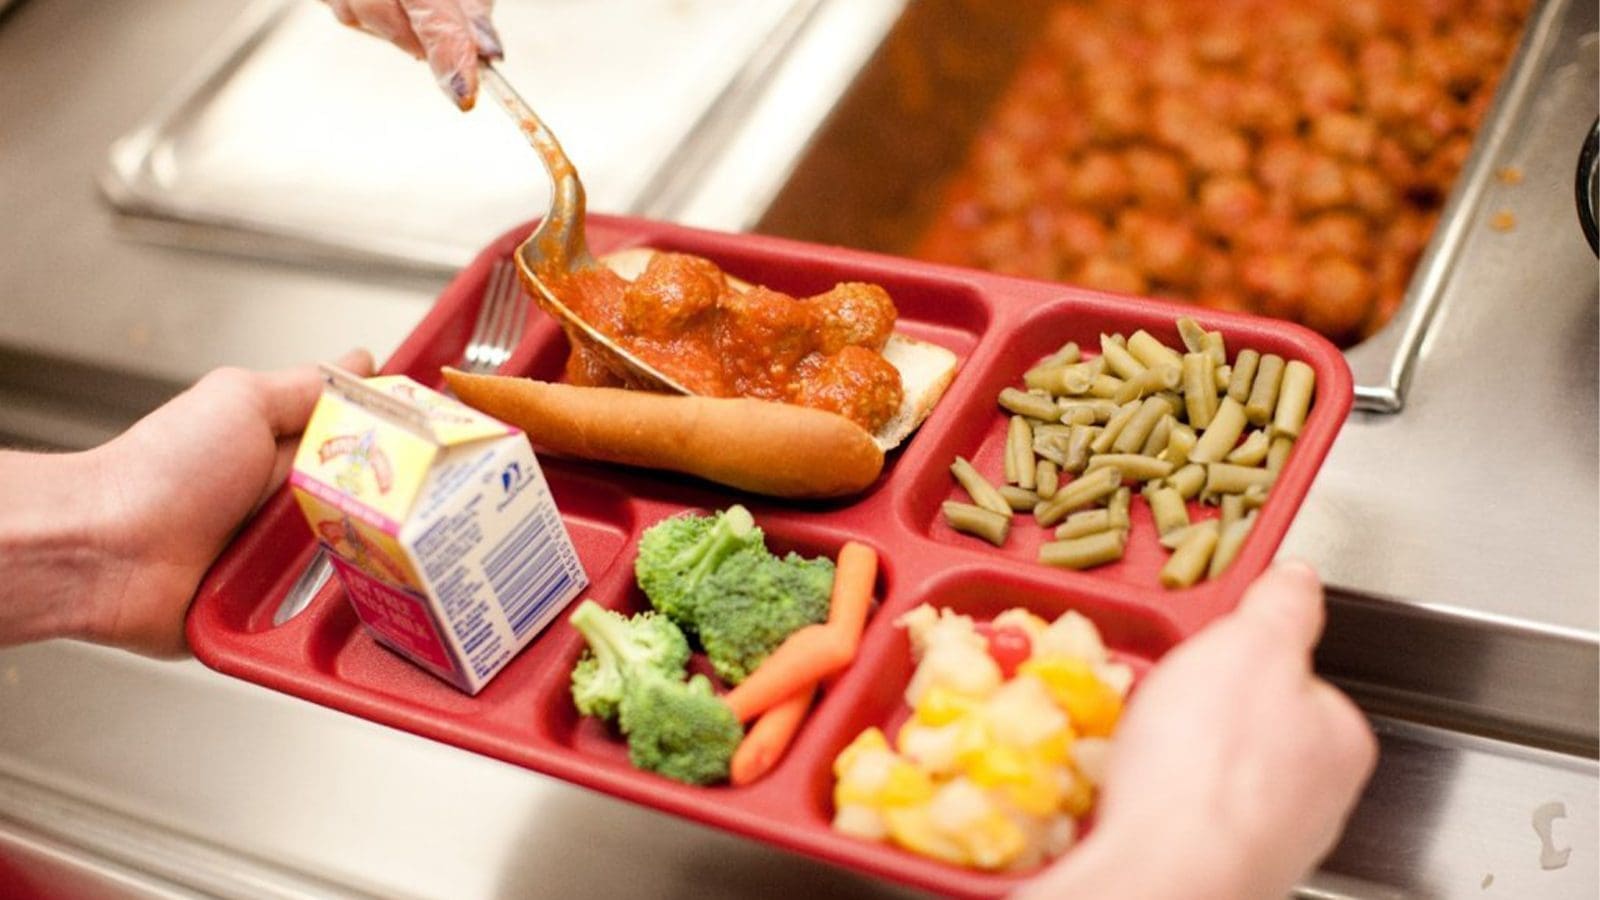 Aligning U.S school meals with dietary guidelines boosts children’s well-being, research finds